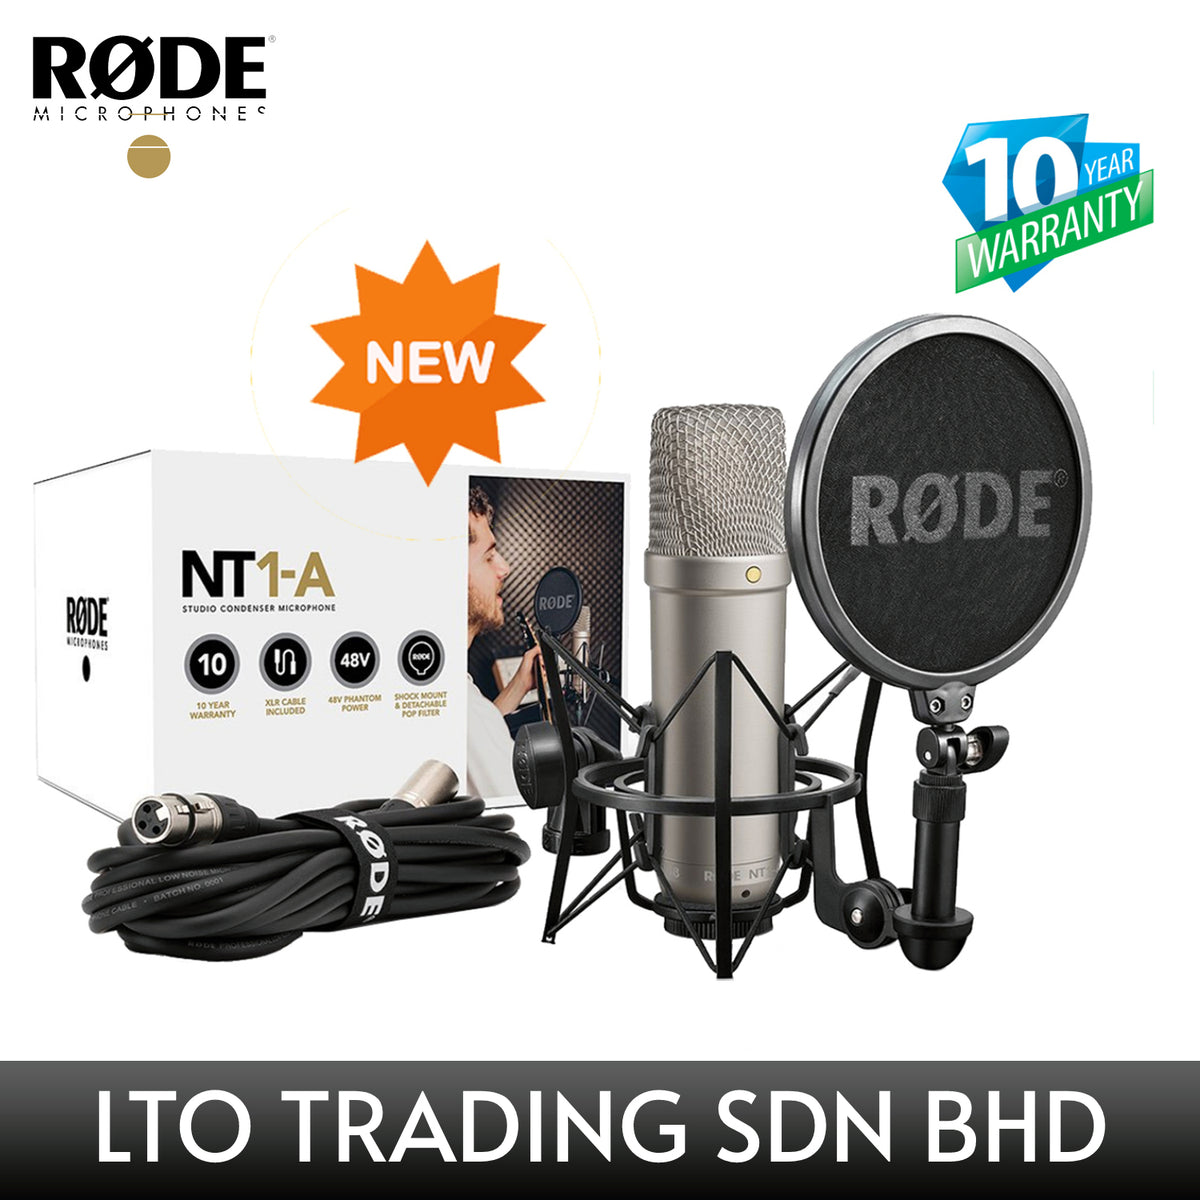 Rode NT1-A Condensor Microphone